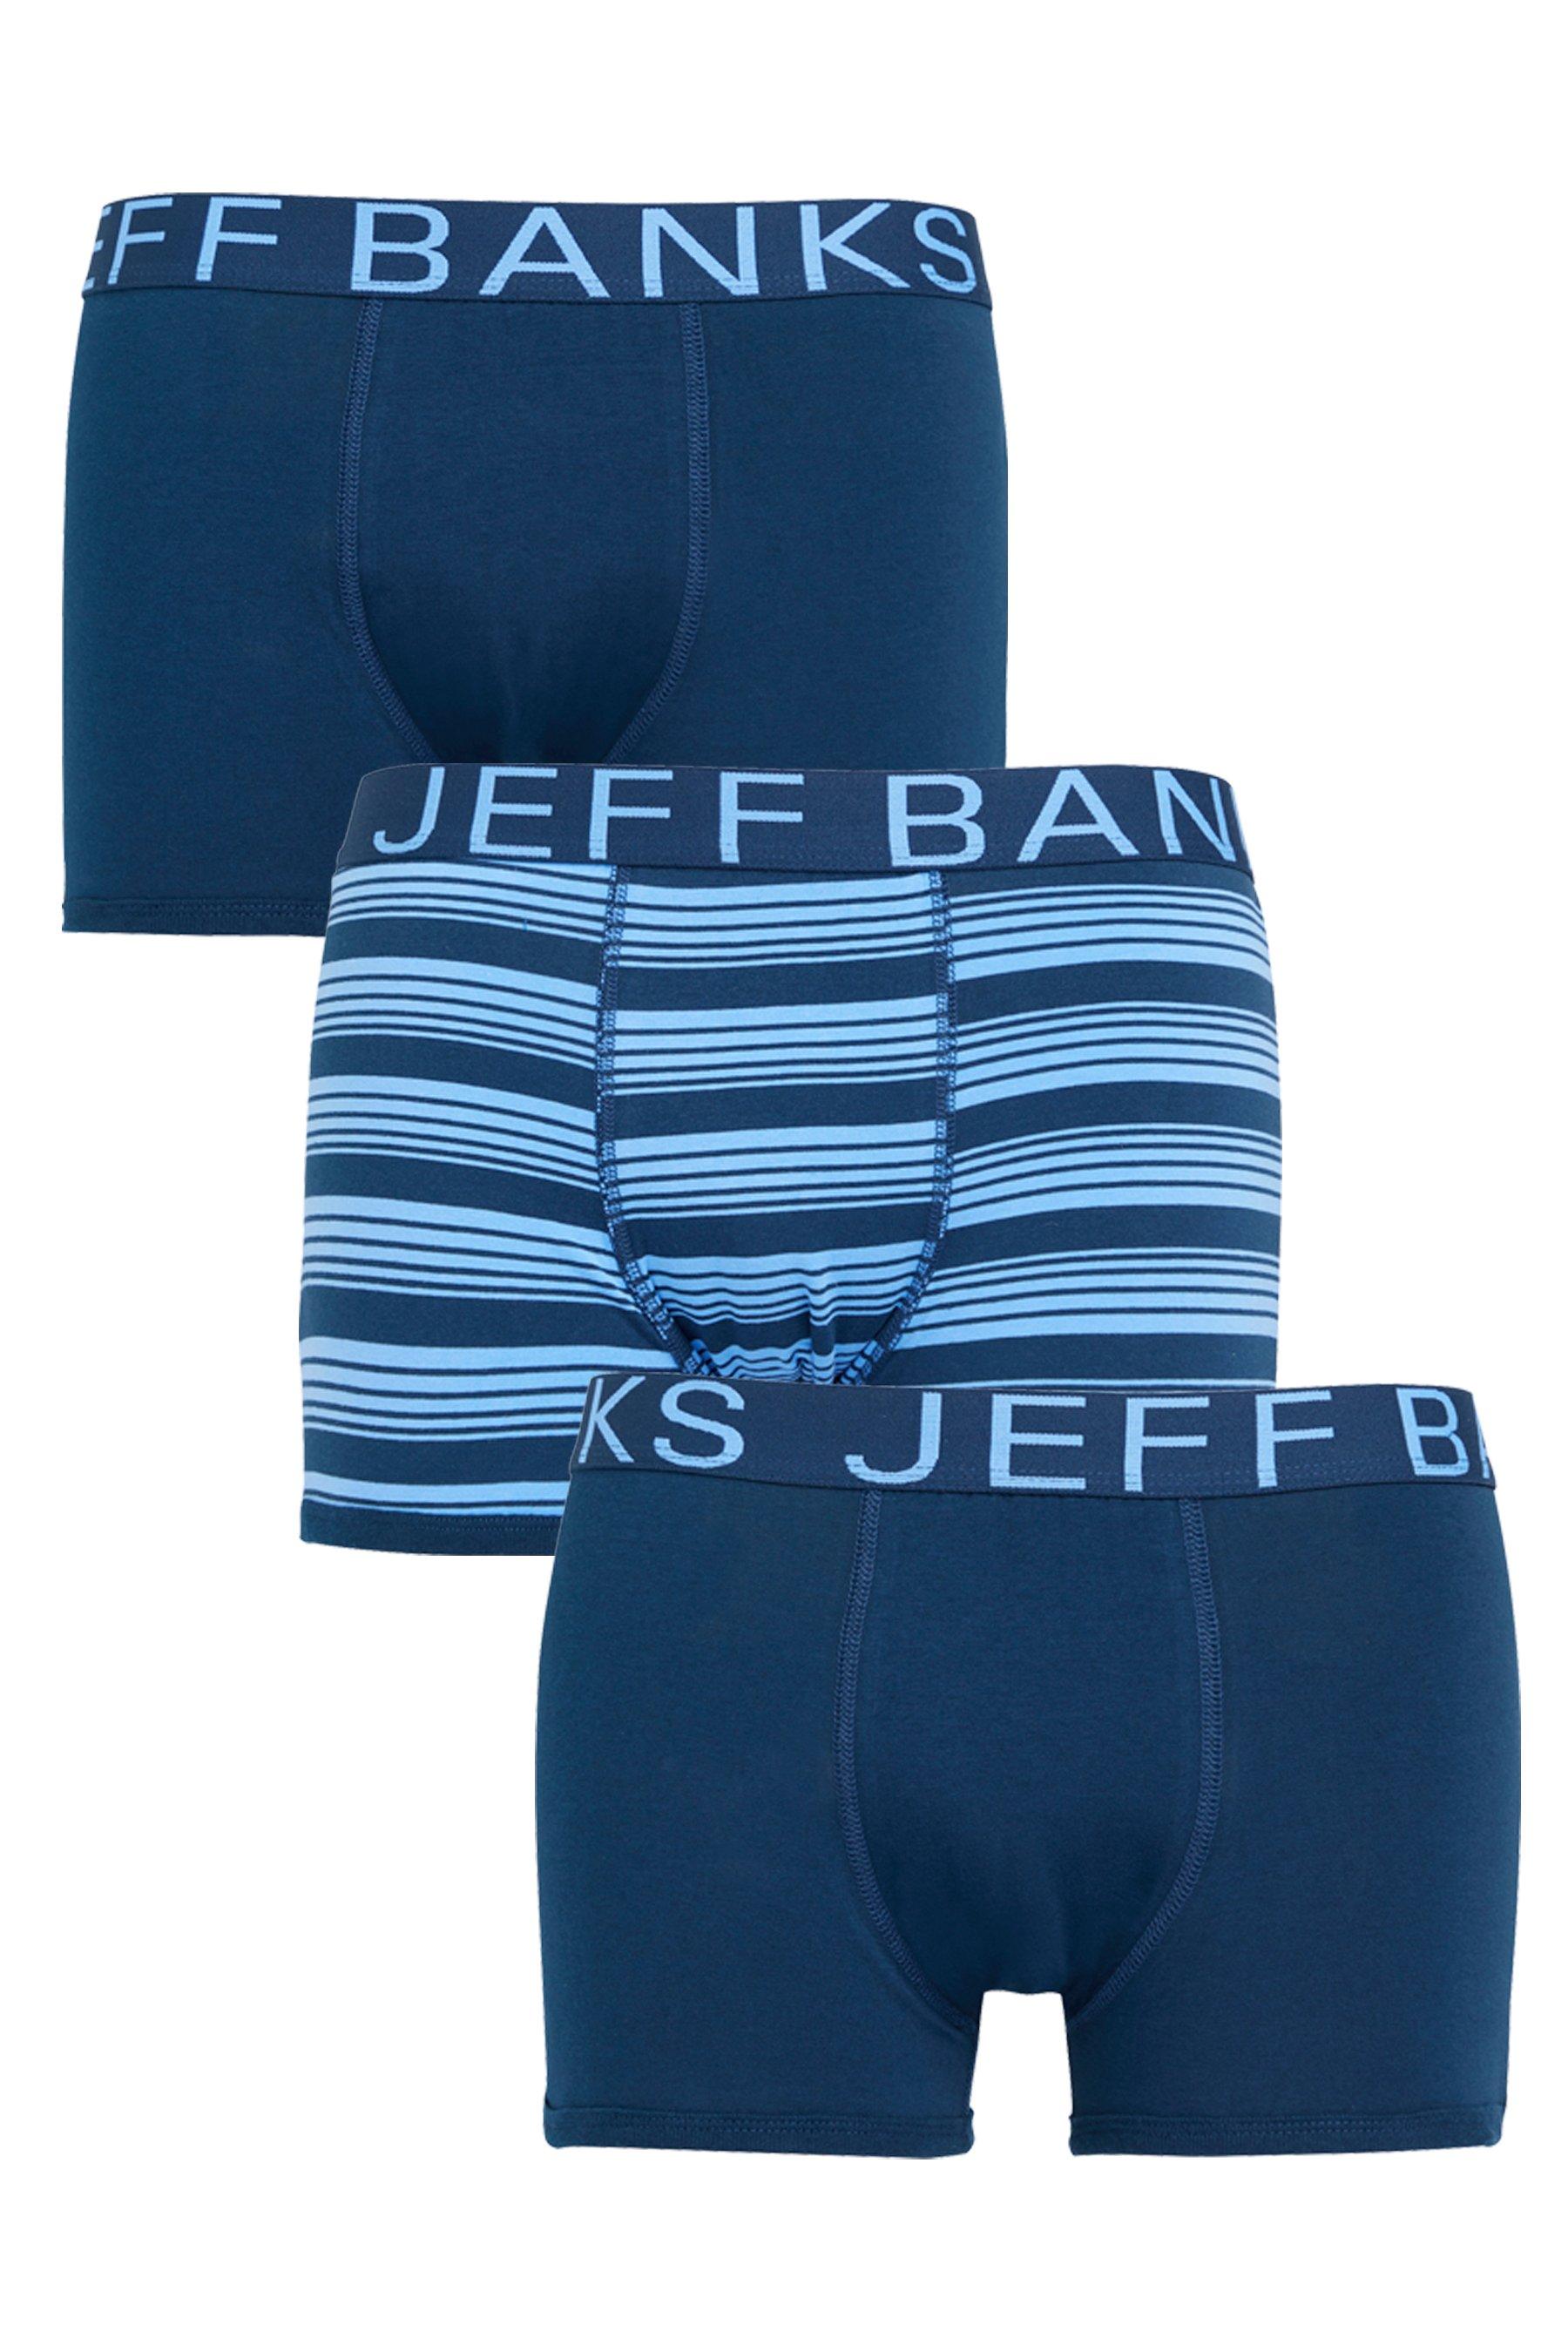 jeff banks pack of 3 navy fashion trunks - mens - blue - size: small